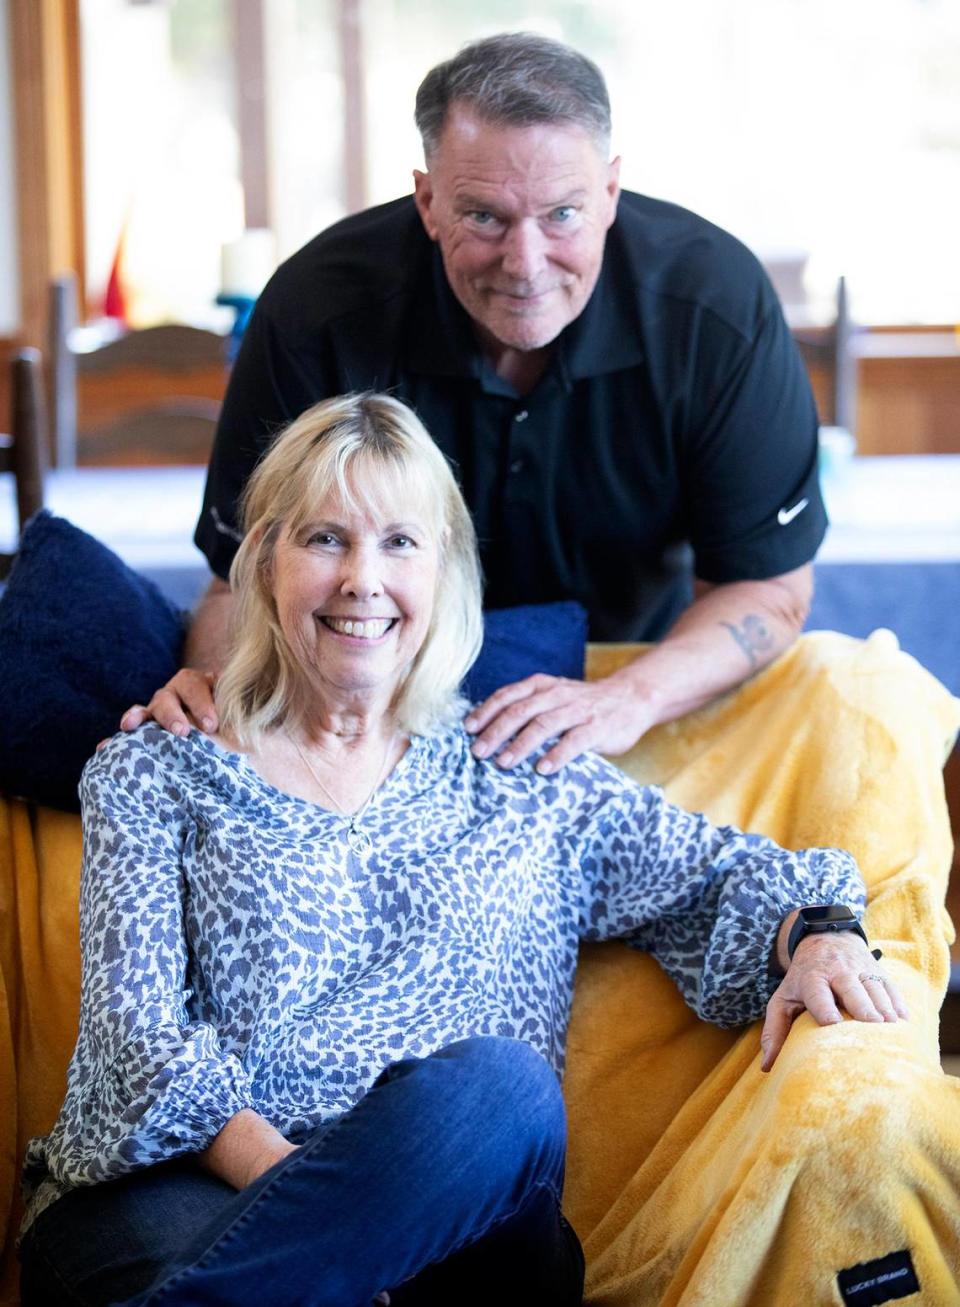 Mike Reeves and Linda Giordano worked to help the Barakazai family, who spent more than two years hiding from the Taliban, secure special immigration visas to come to the United States.